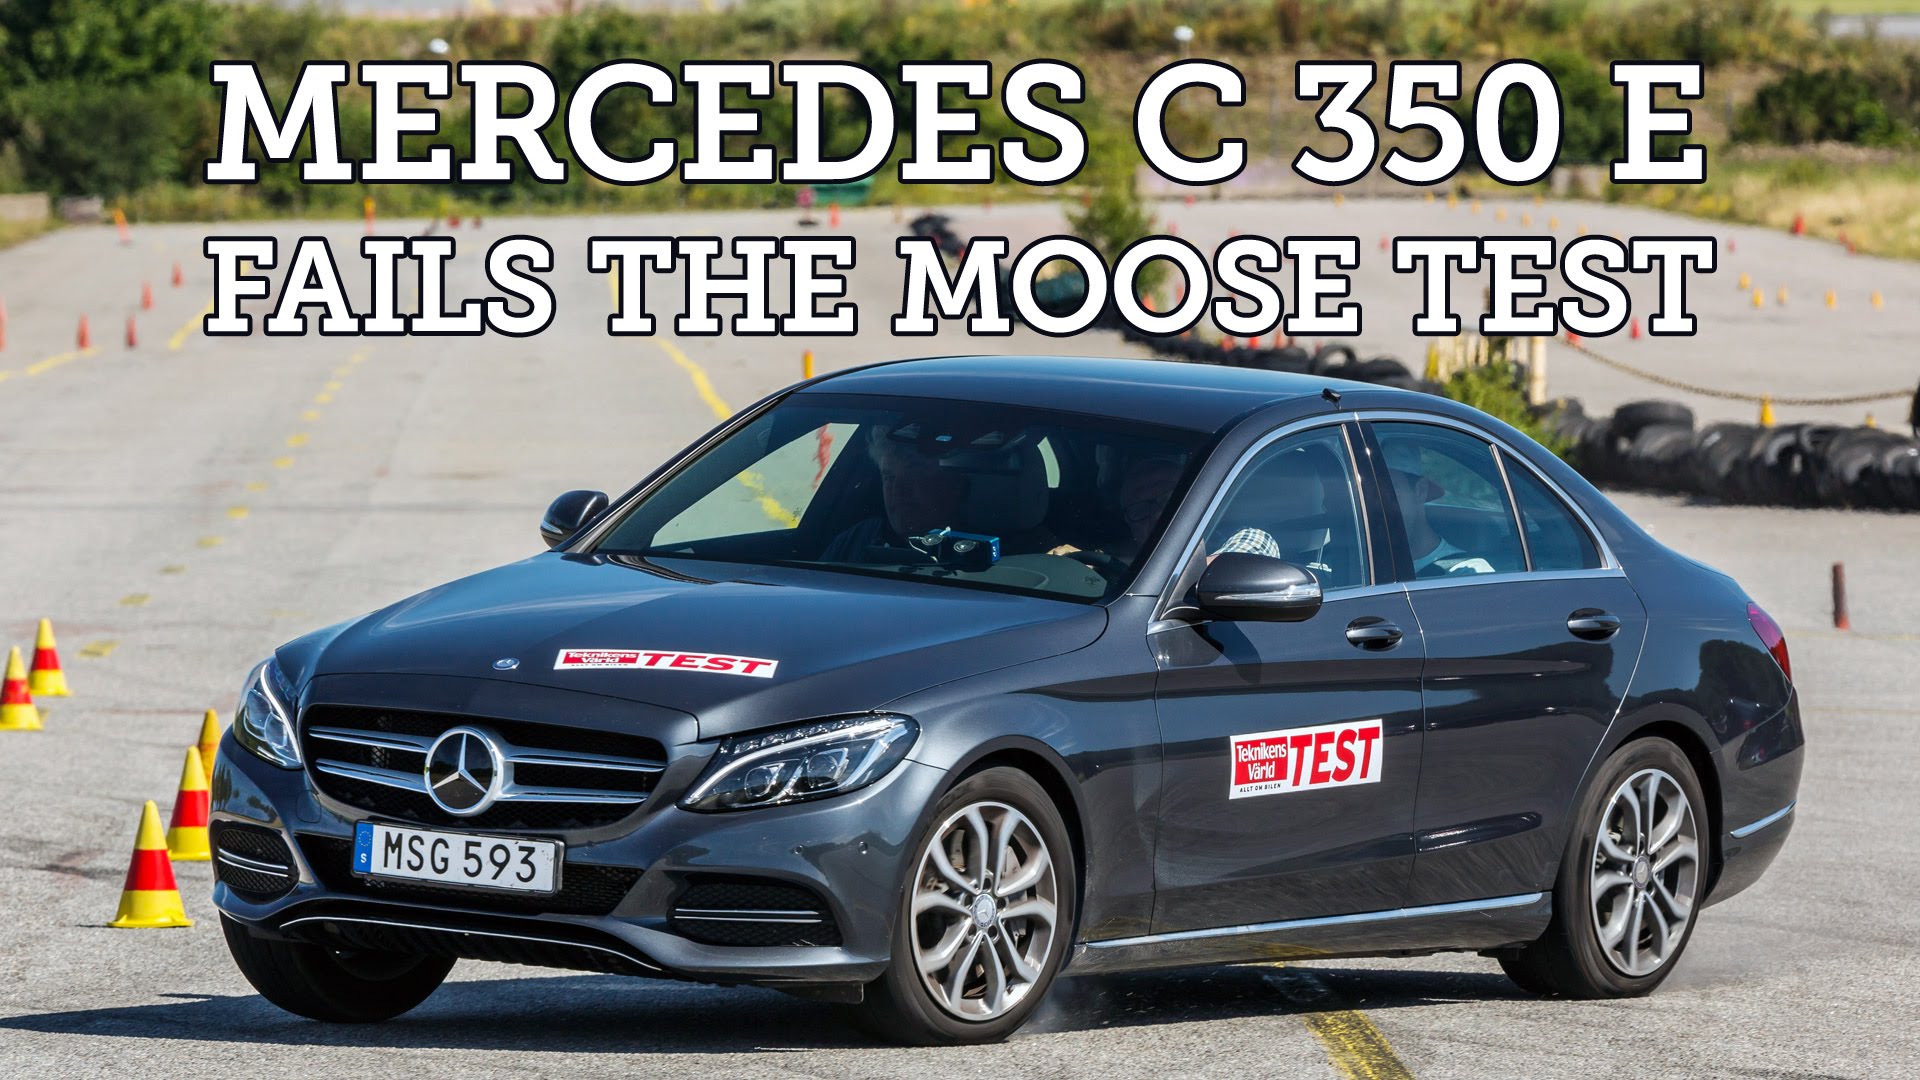 https://blogs.perl.org/users/byterock/the-new-mercedes-c-350-hybrid-was-tested-at-the-moose-test-and-it-failed-miserably.jpg